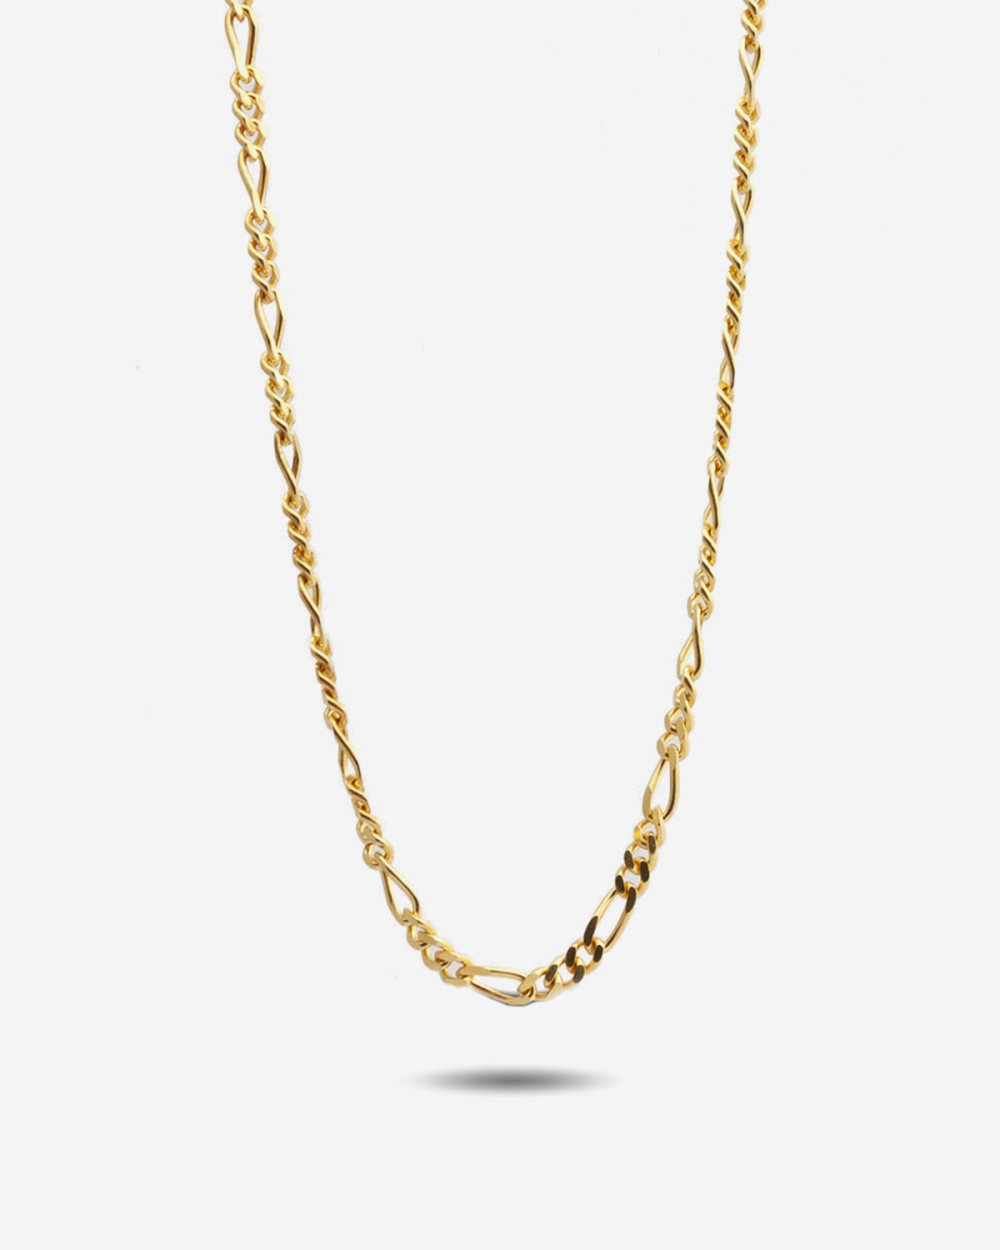 YELLOW GOLD 3+1 CURB CHAIN NECKLACE